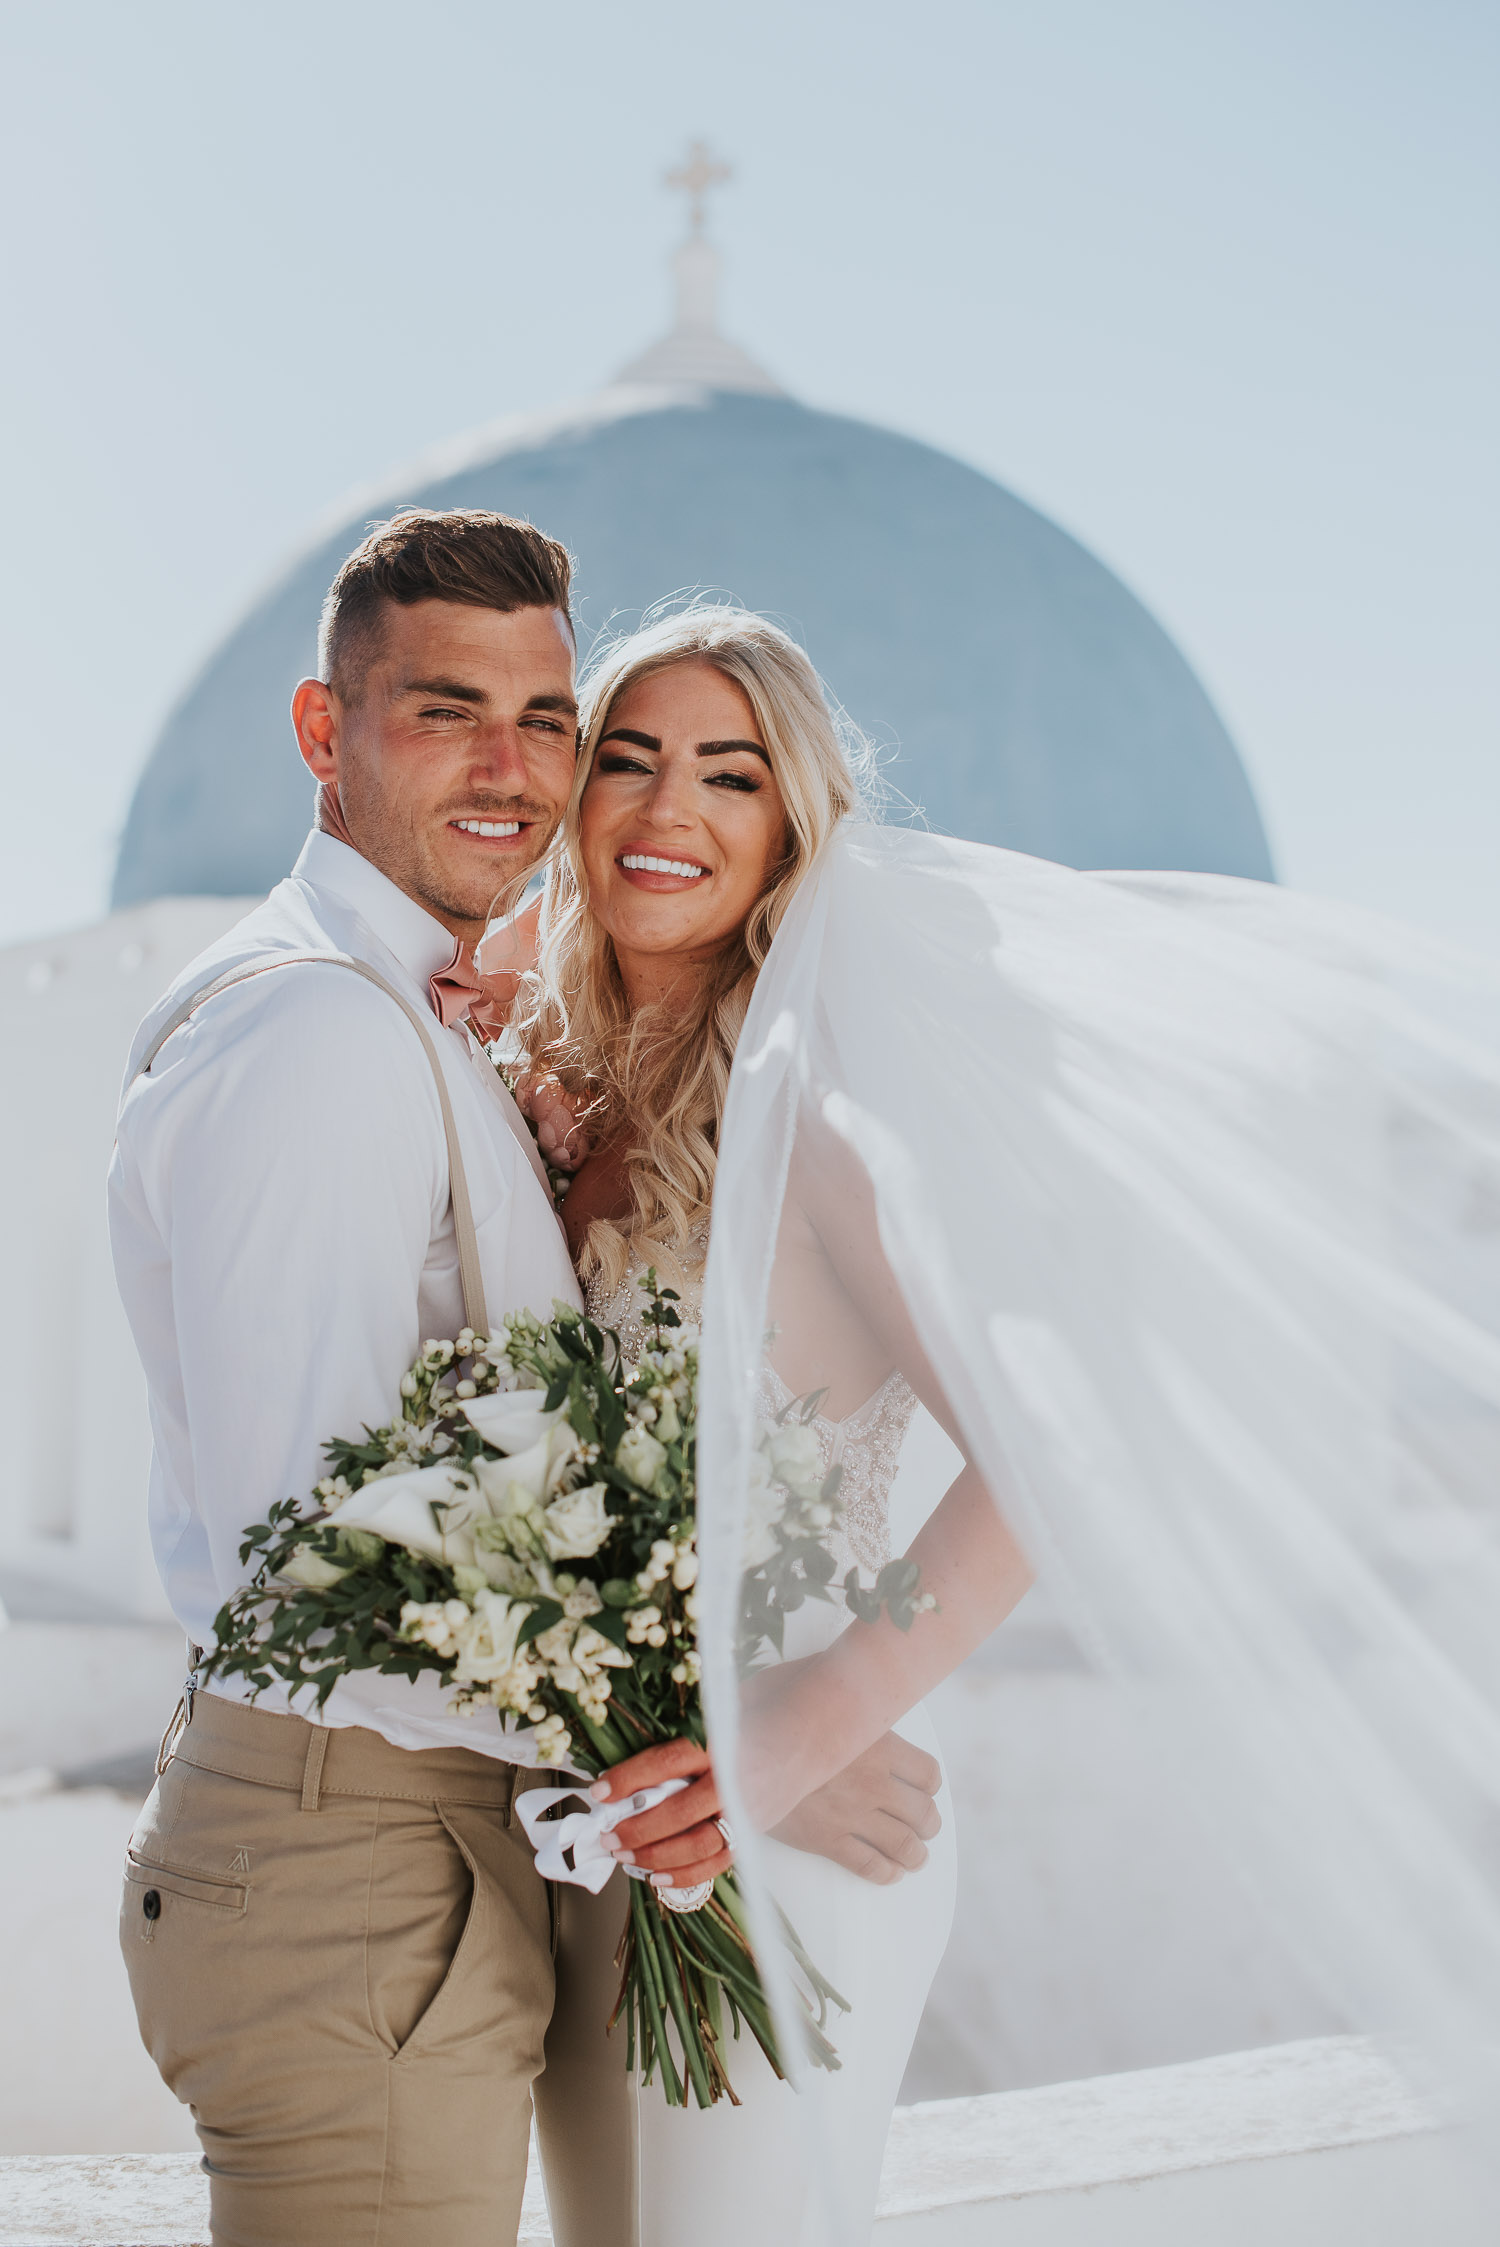 Wedding photographer Santorini: close up of bride and groom with the blue dome behind and her veil them by Ben and Vesna.